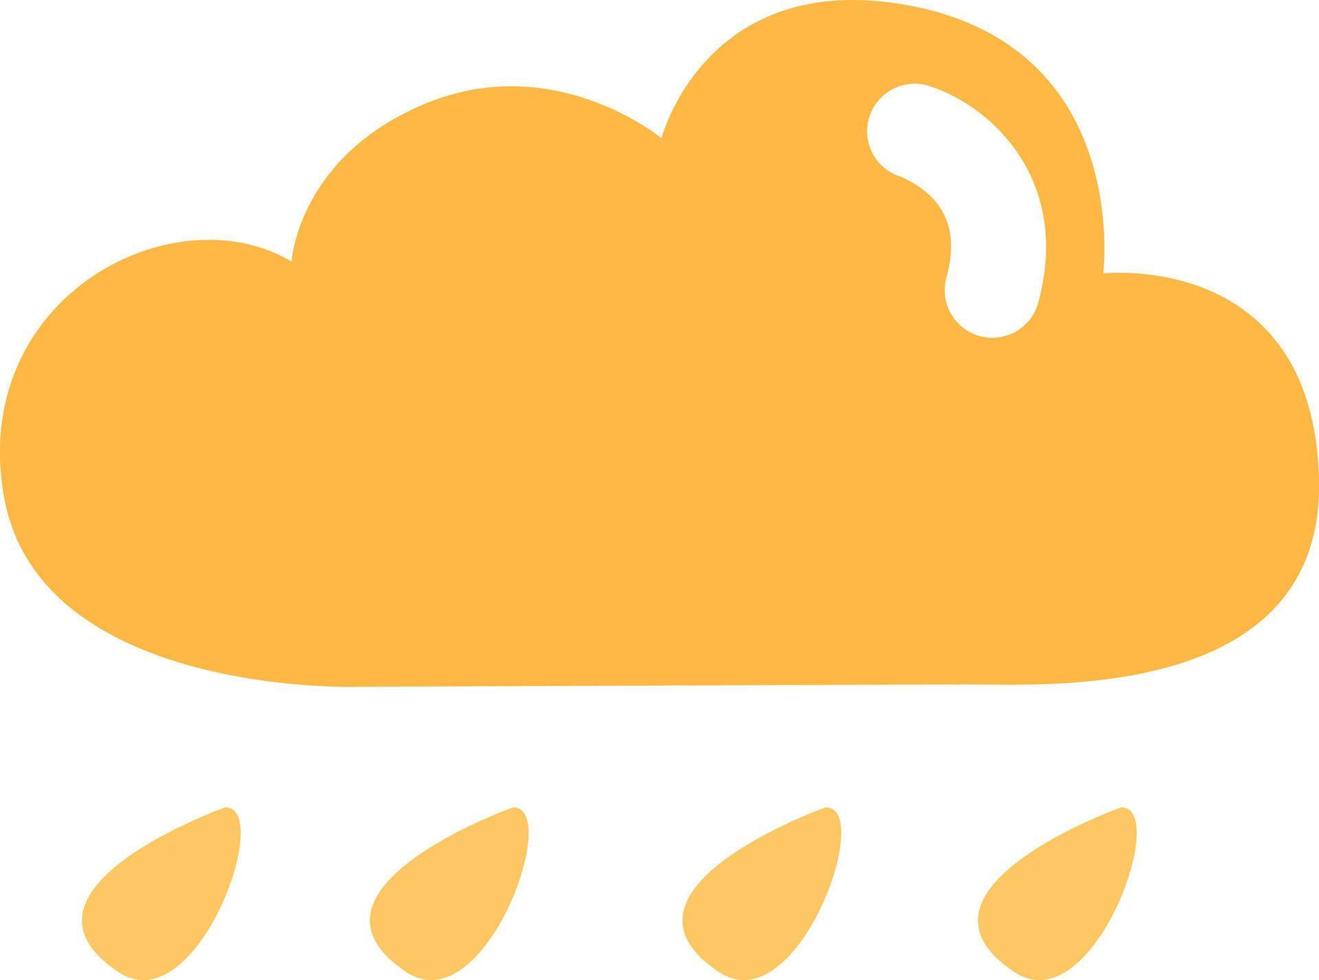 Yellow rain cloud,illustration, vector, on a white background. vector